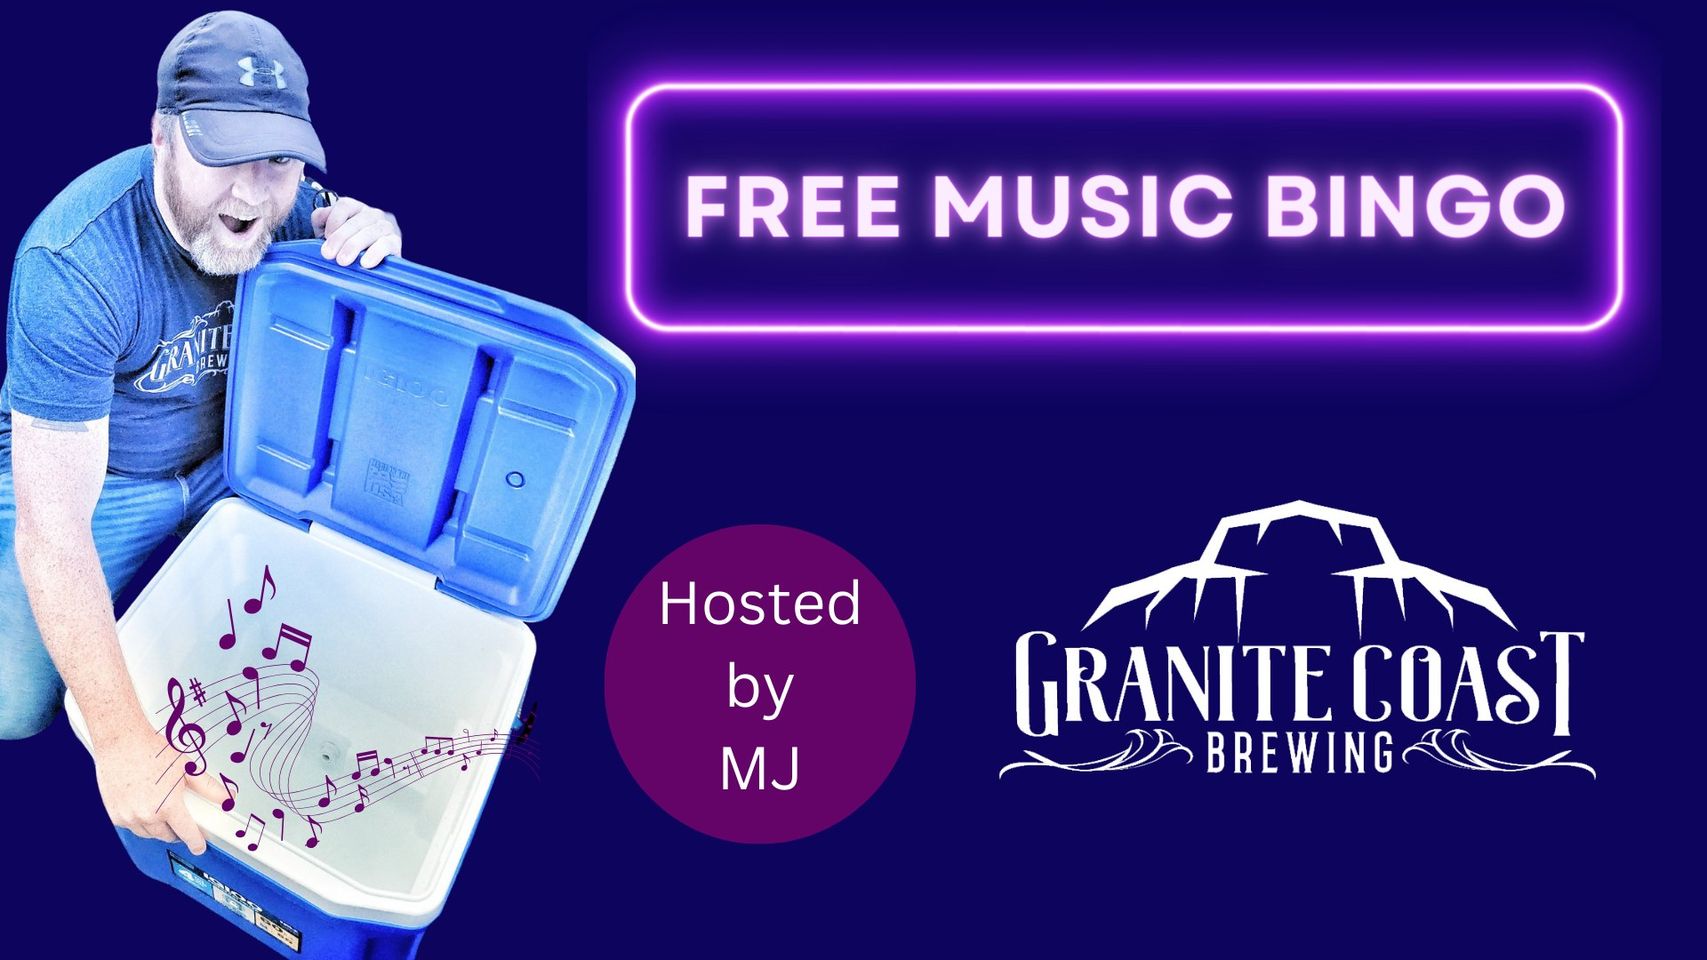 Check out this exciting image of a guy joyfully opening a cooler at Granite Coast Brewing's free Music Bingo event, co-hosted with MJ. The musical note logo adds a creative touch to the occasion.